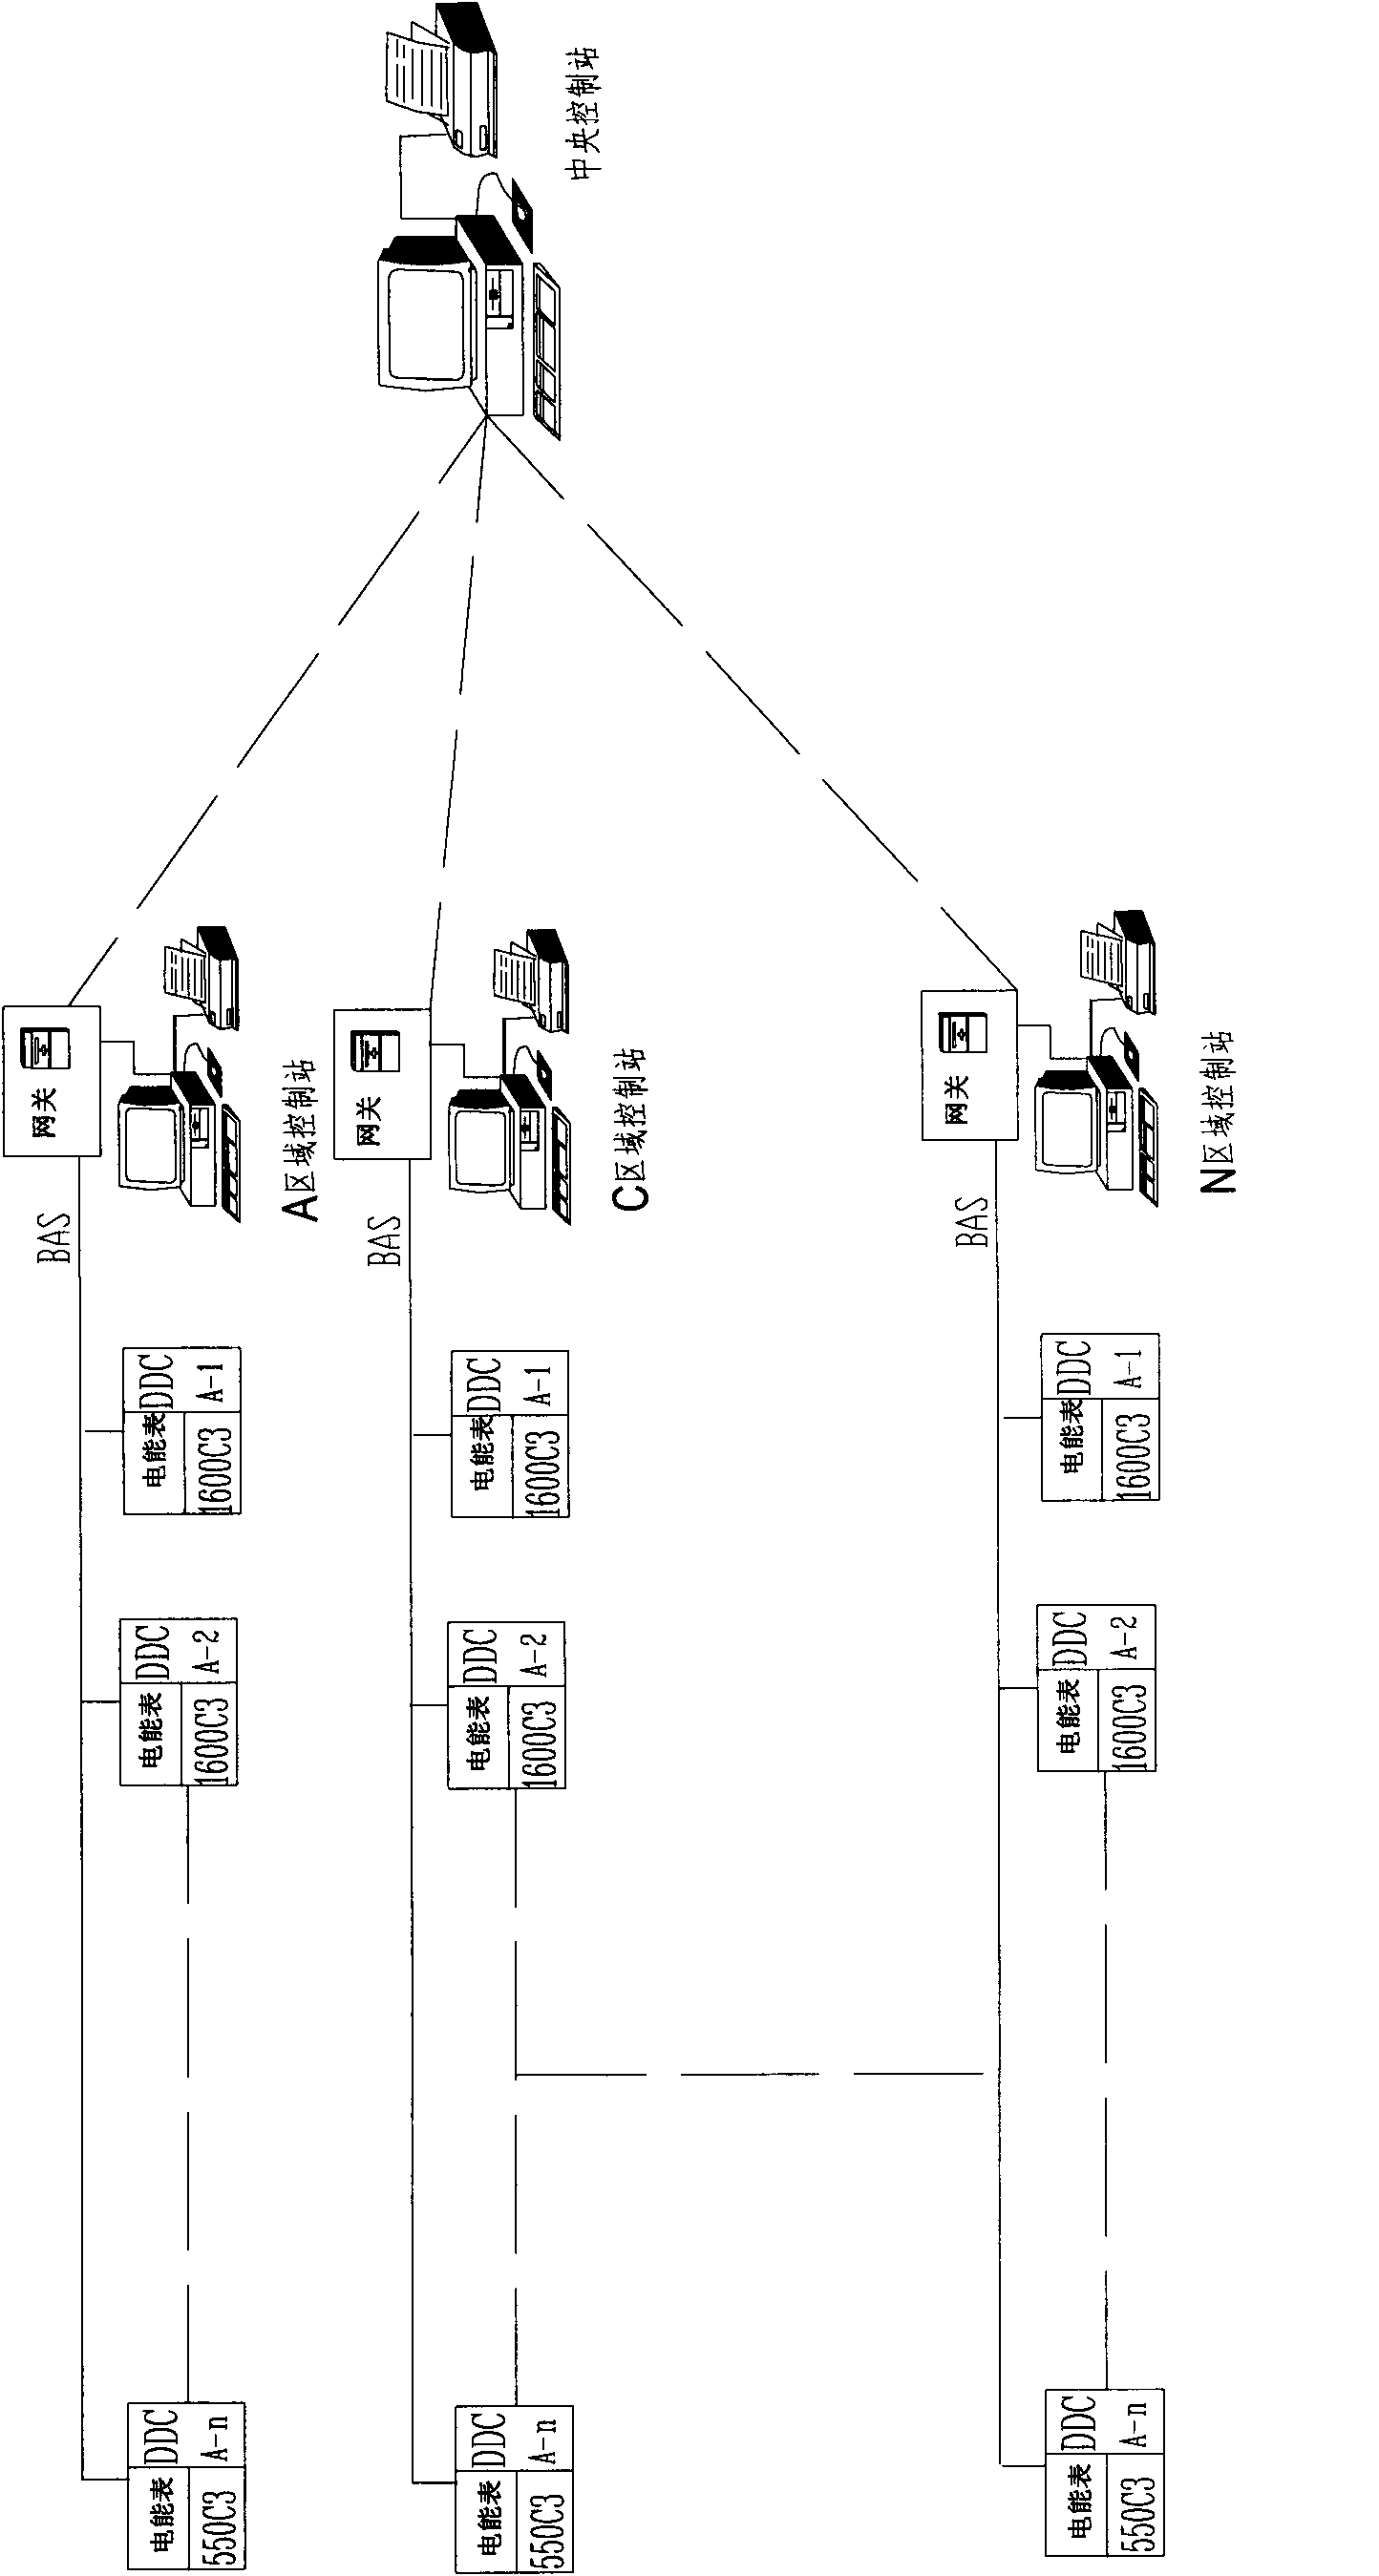 Centralized control type monitoring system of electricity meter based on BACnet (a data communication protocol for building automation and control networks)